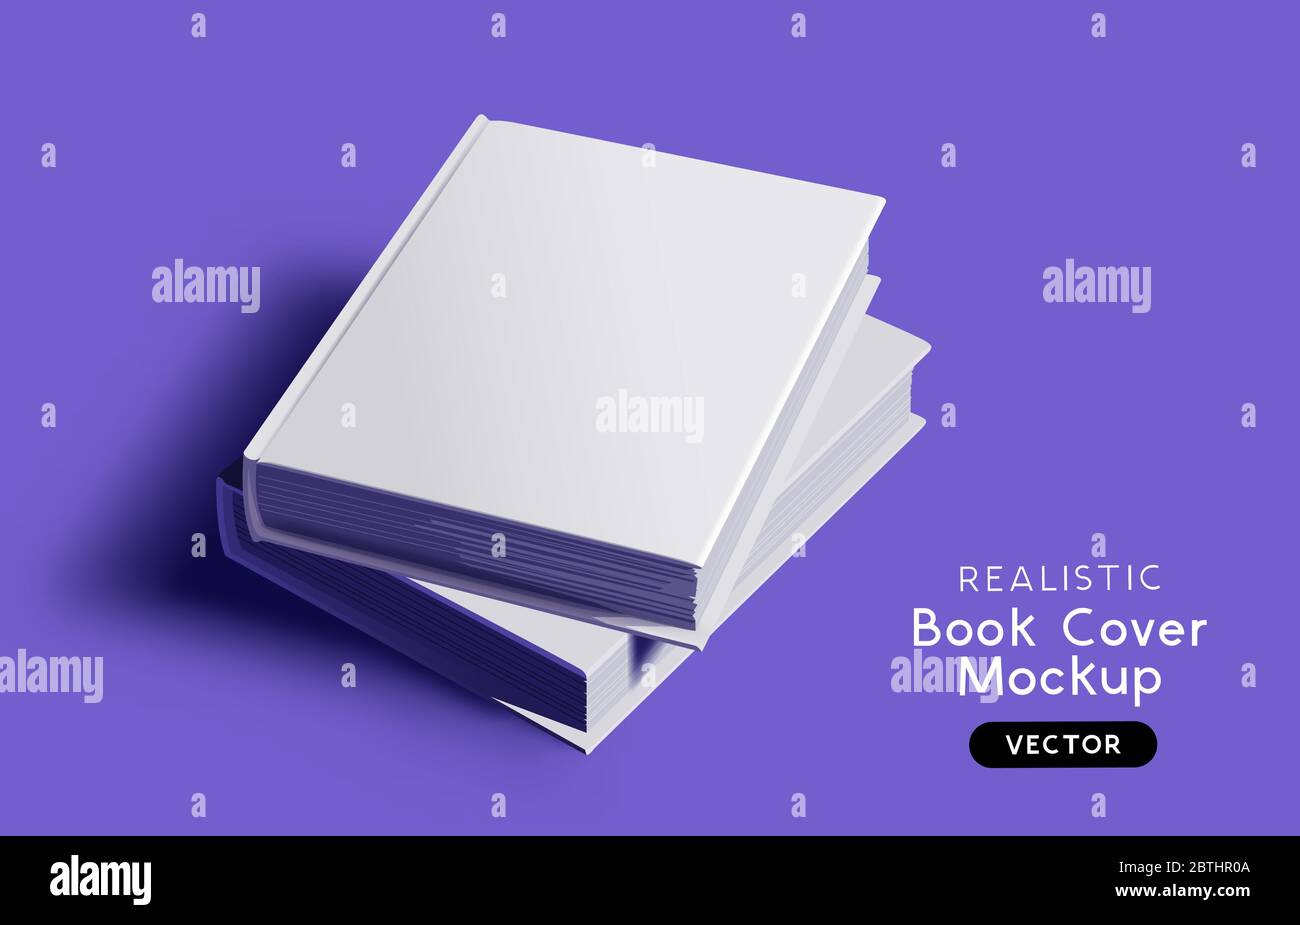 Blank book cover mockup design layout with shadows for branding. Vector illustration. Stock Vector